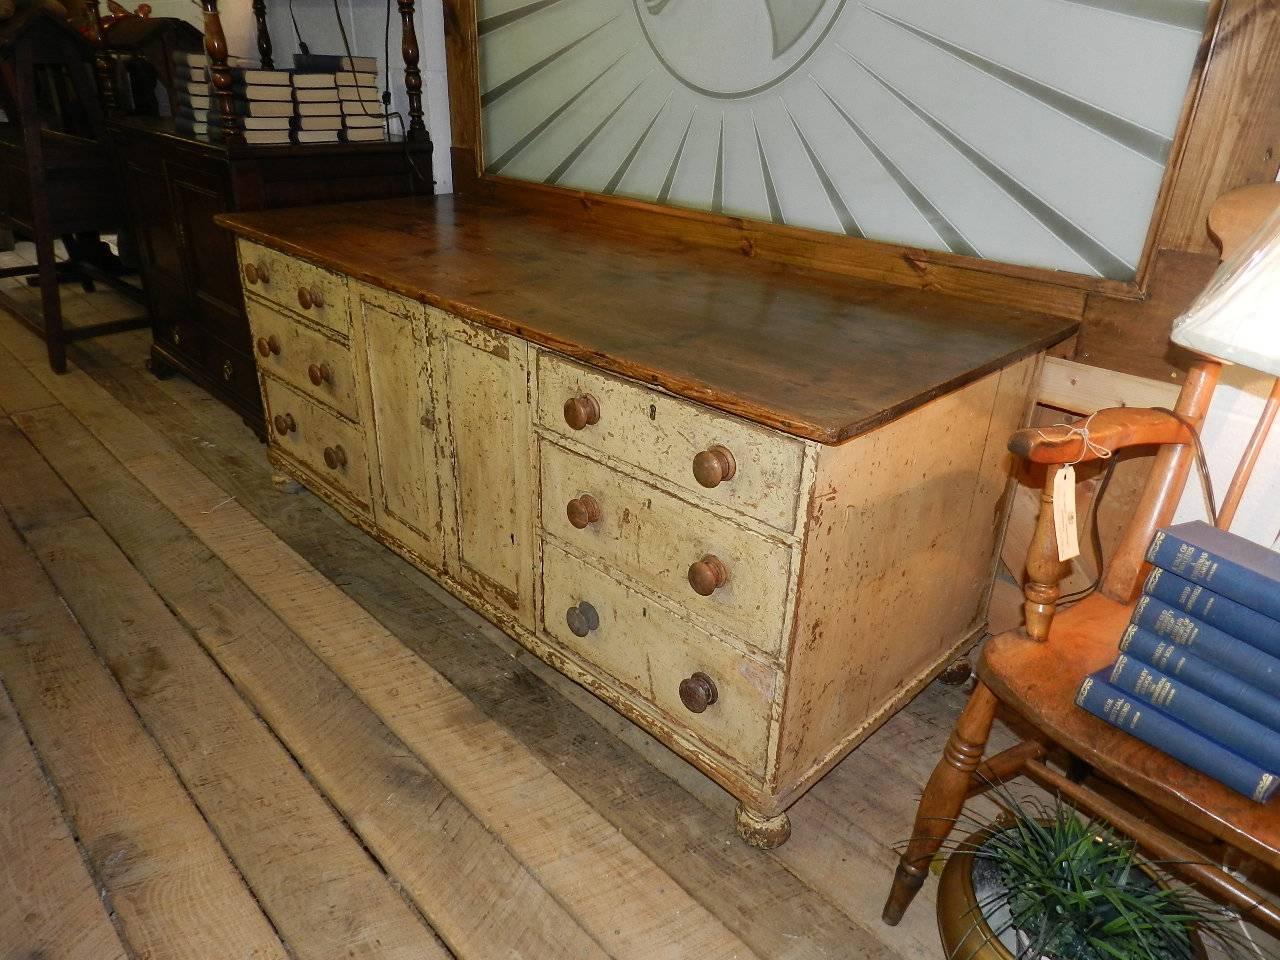 Antique pine dresser from East Yorkshire in England .The drawers have dovetailed joints and wooden knobs. The central cupboard has a pair of paneled doors.The paint is original .